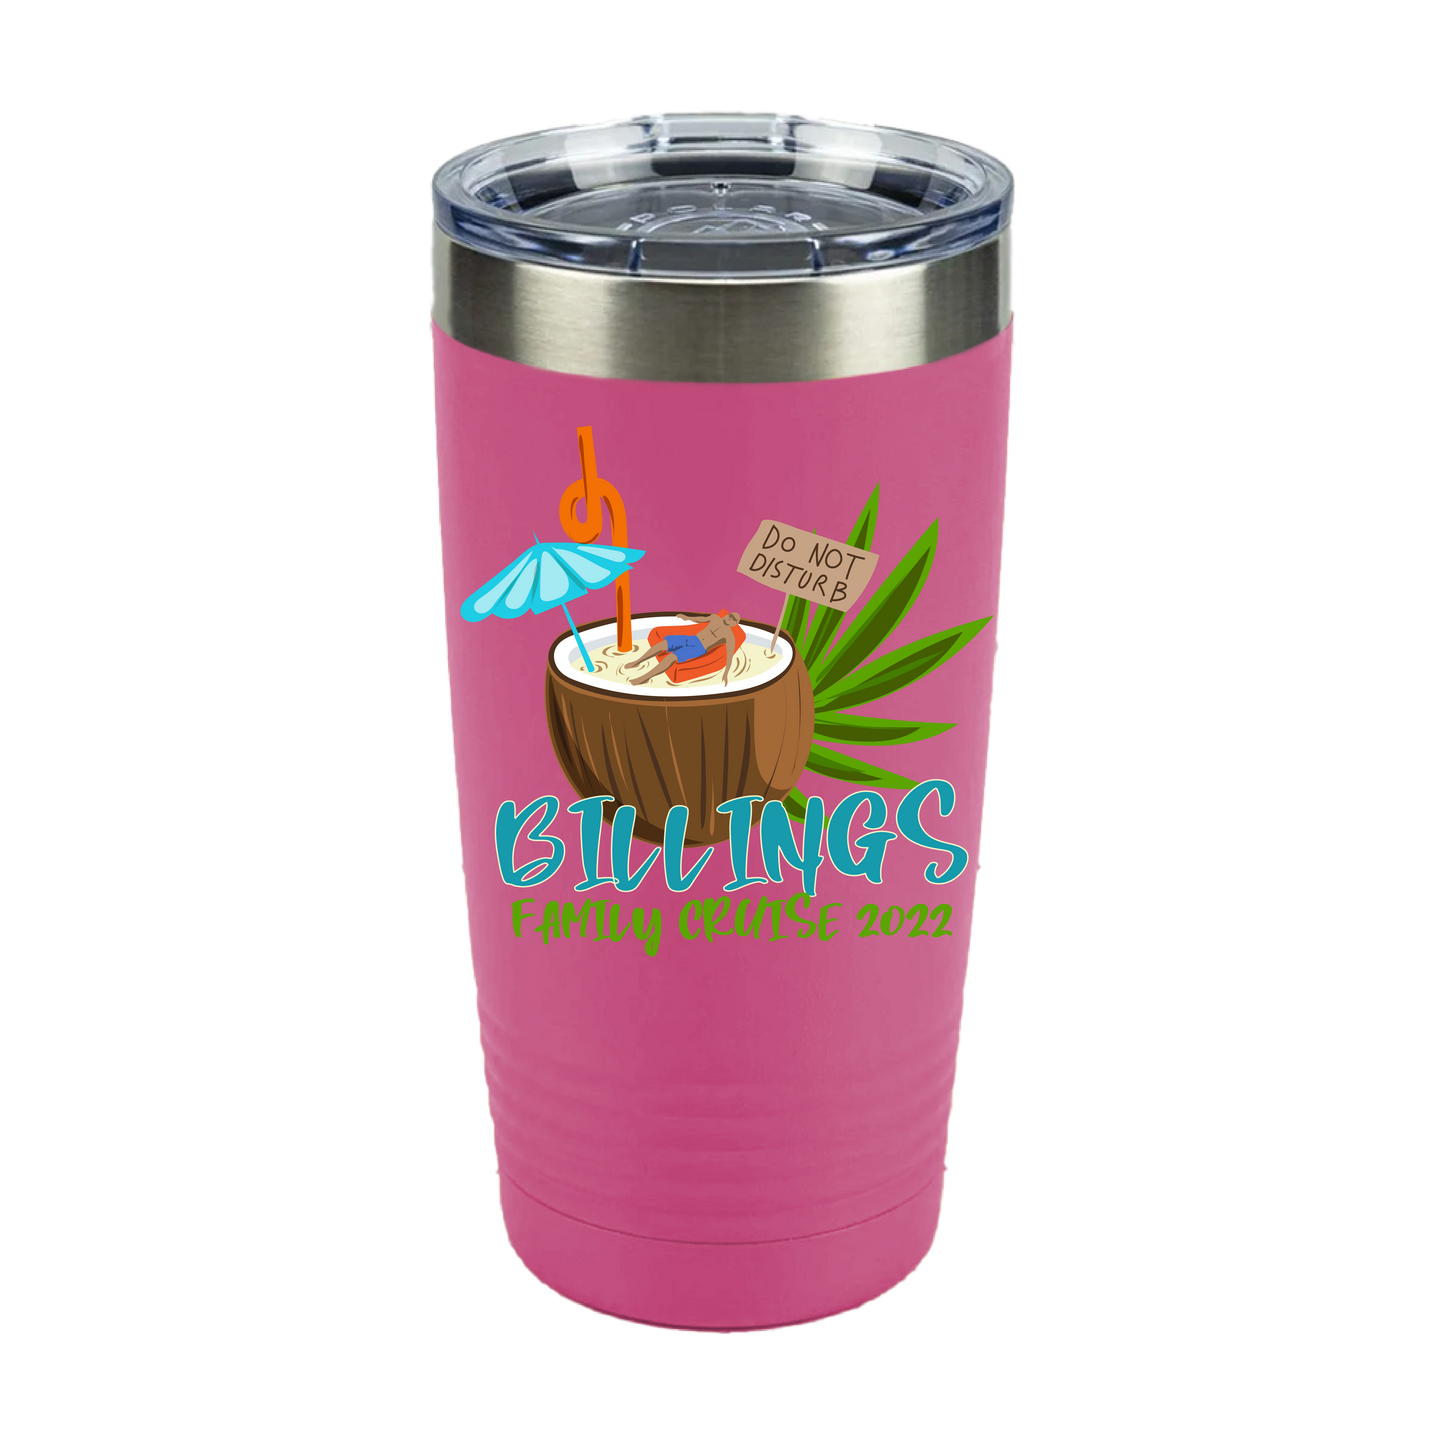 Do Not Disturb - Personalized Insulated Water Tumbler